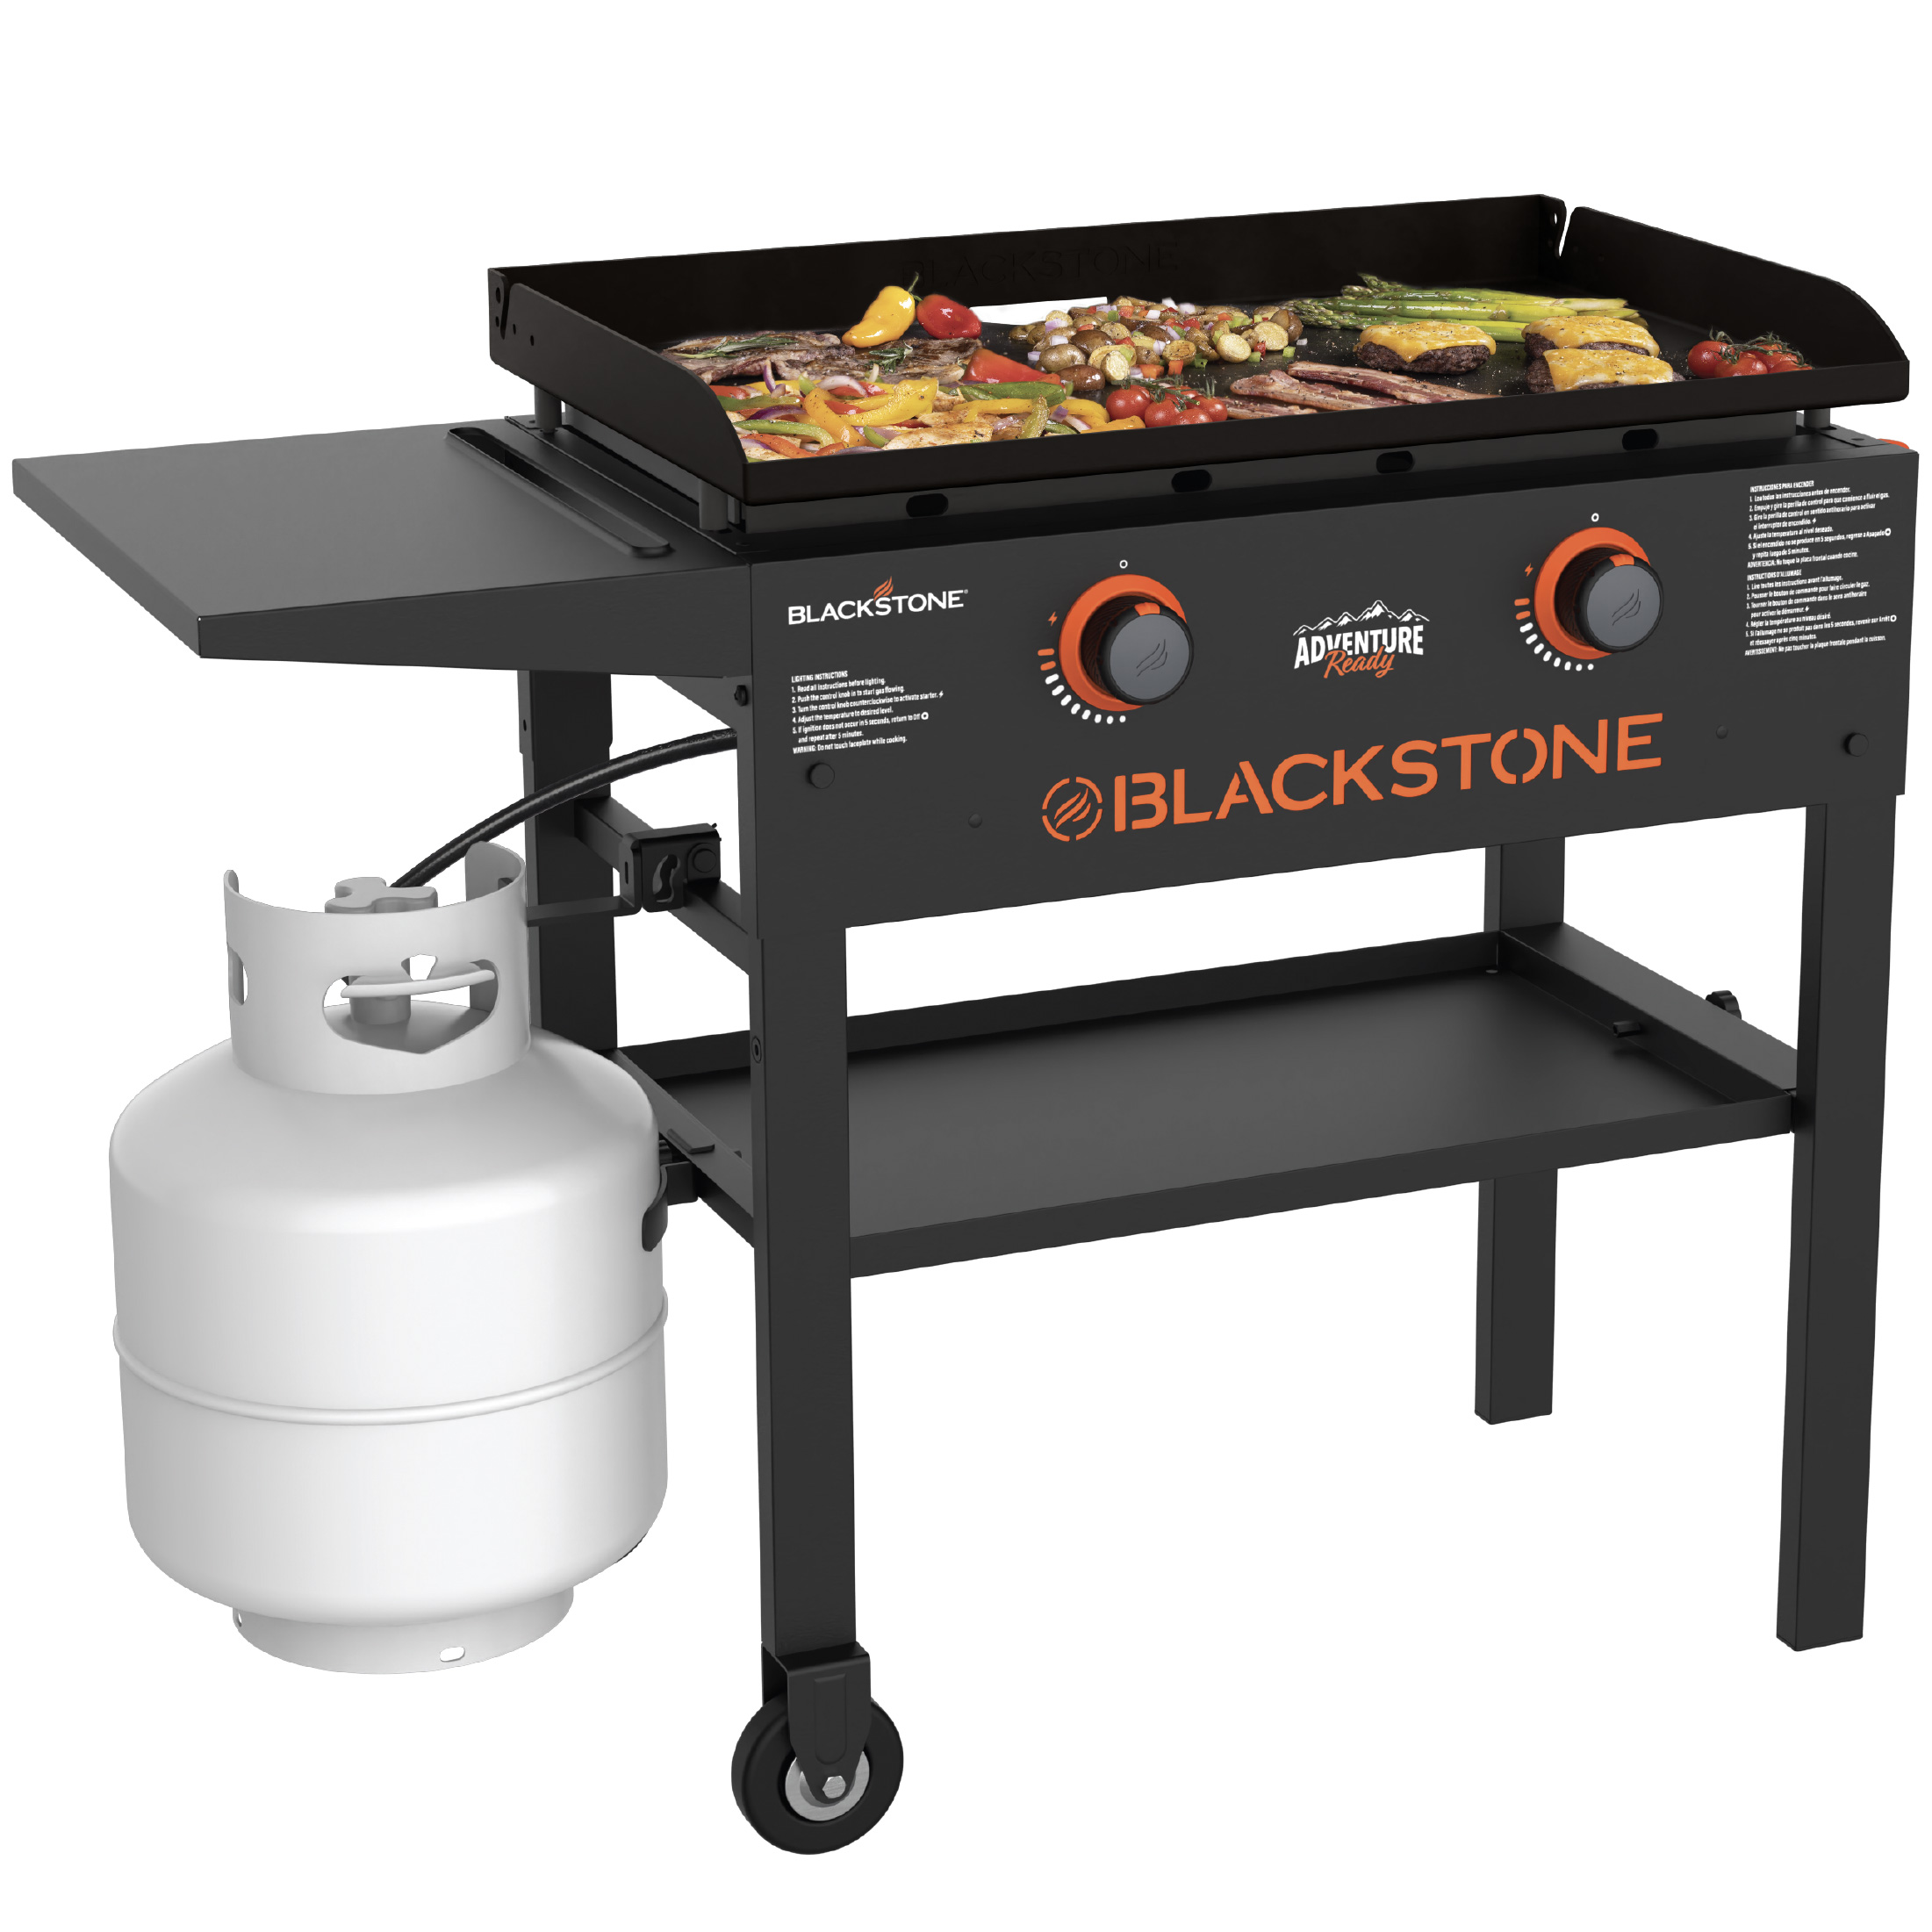 Blackstone Adventure Ready 2-Burner 28” Propane Griddle with Omnivore Griddle Plate - image 1 of 16